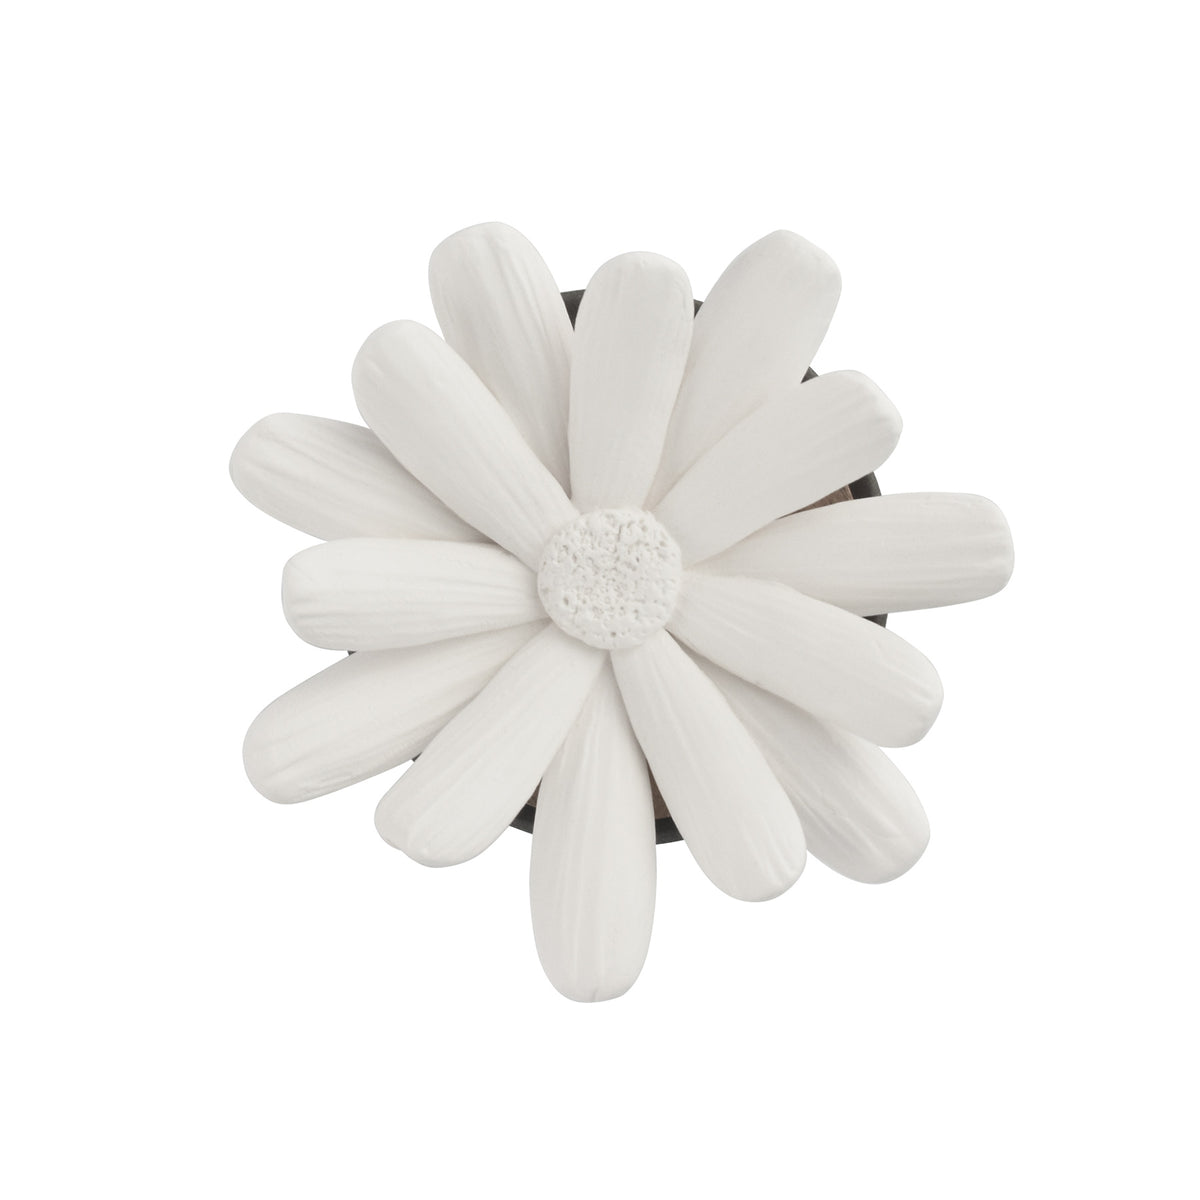 Daisy Bloomster Pot Clay Diffuser